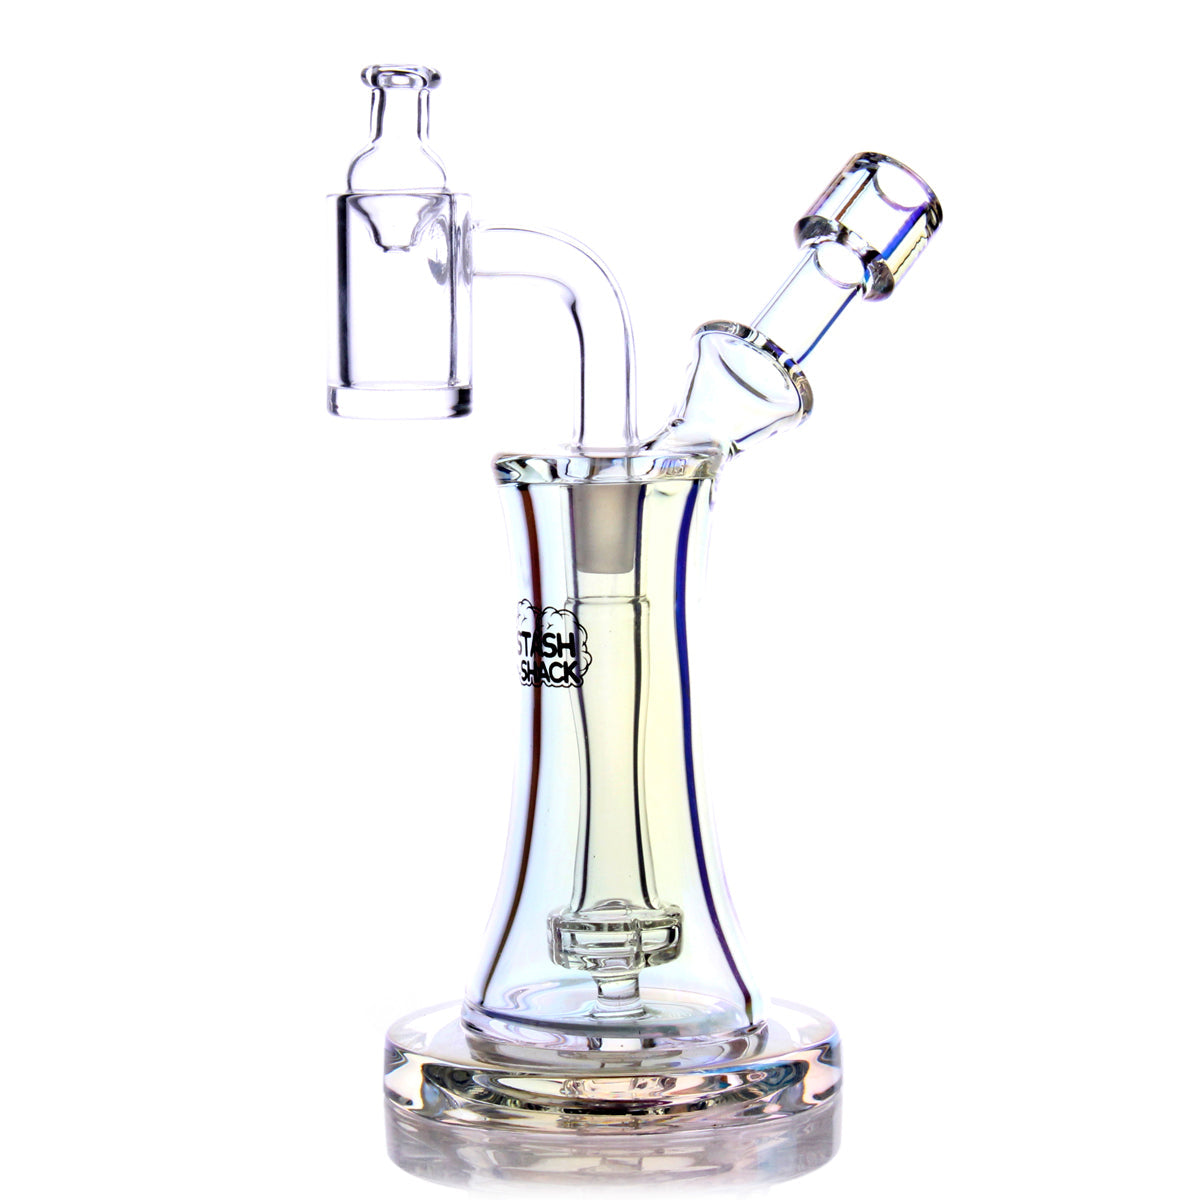 Aurelia Mini Rig by The Stash Shack, compact 5" borosilicate glass dab rig with 10mm joint, front view